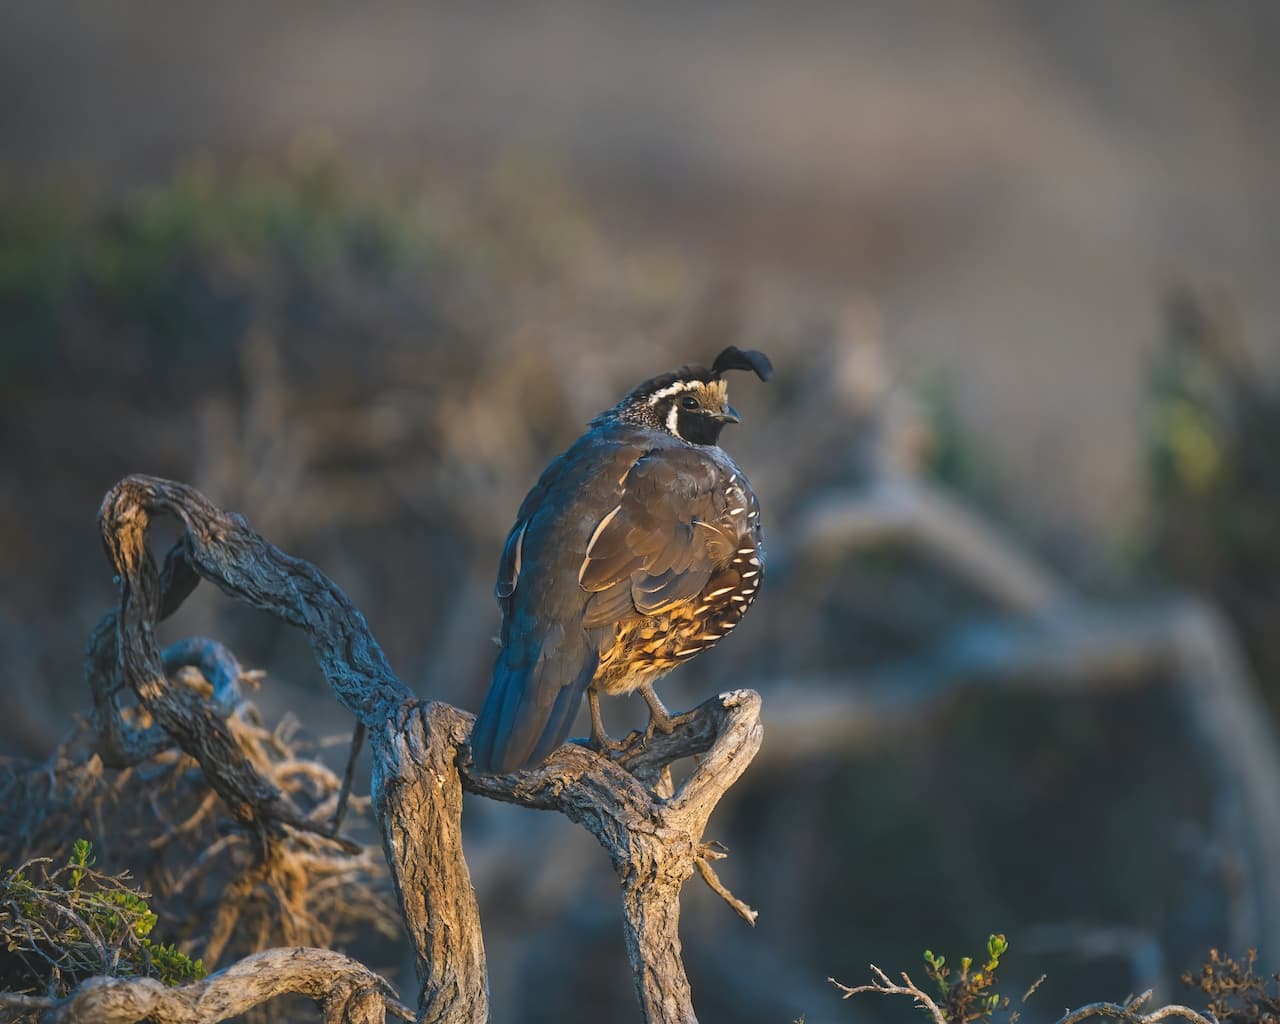 The California Quail Perched On The Wood Looking For Prey